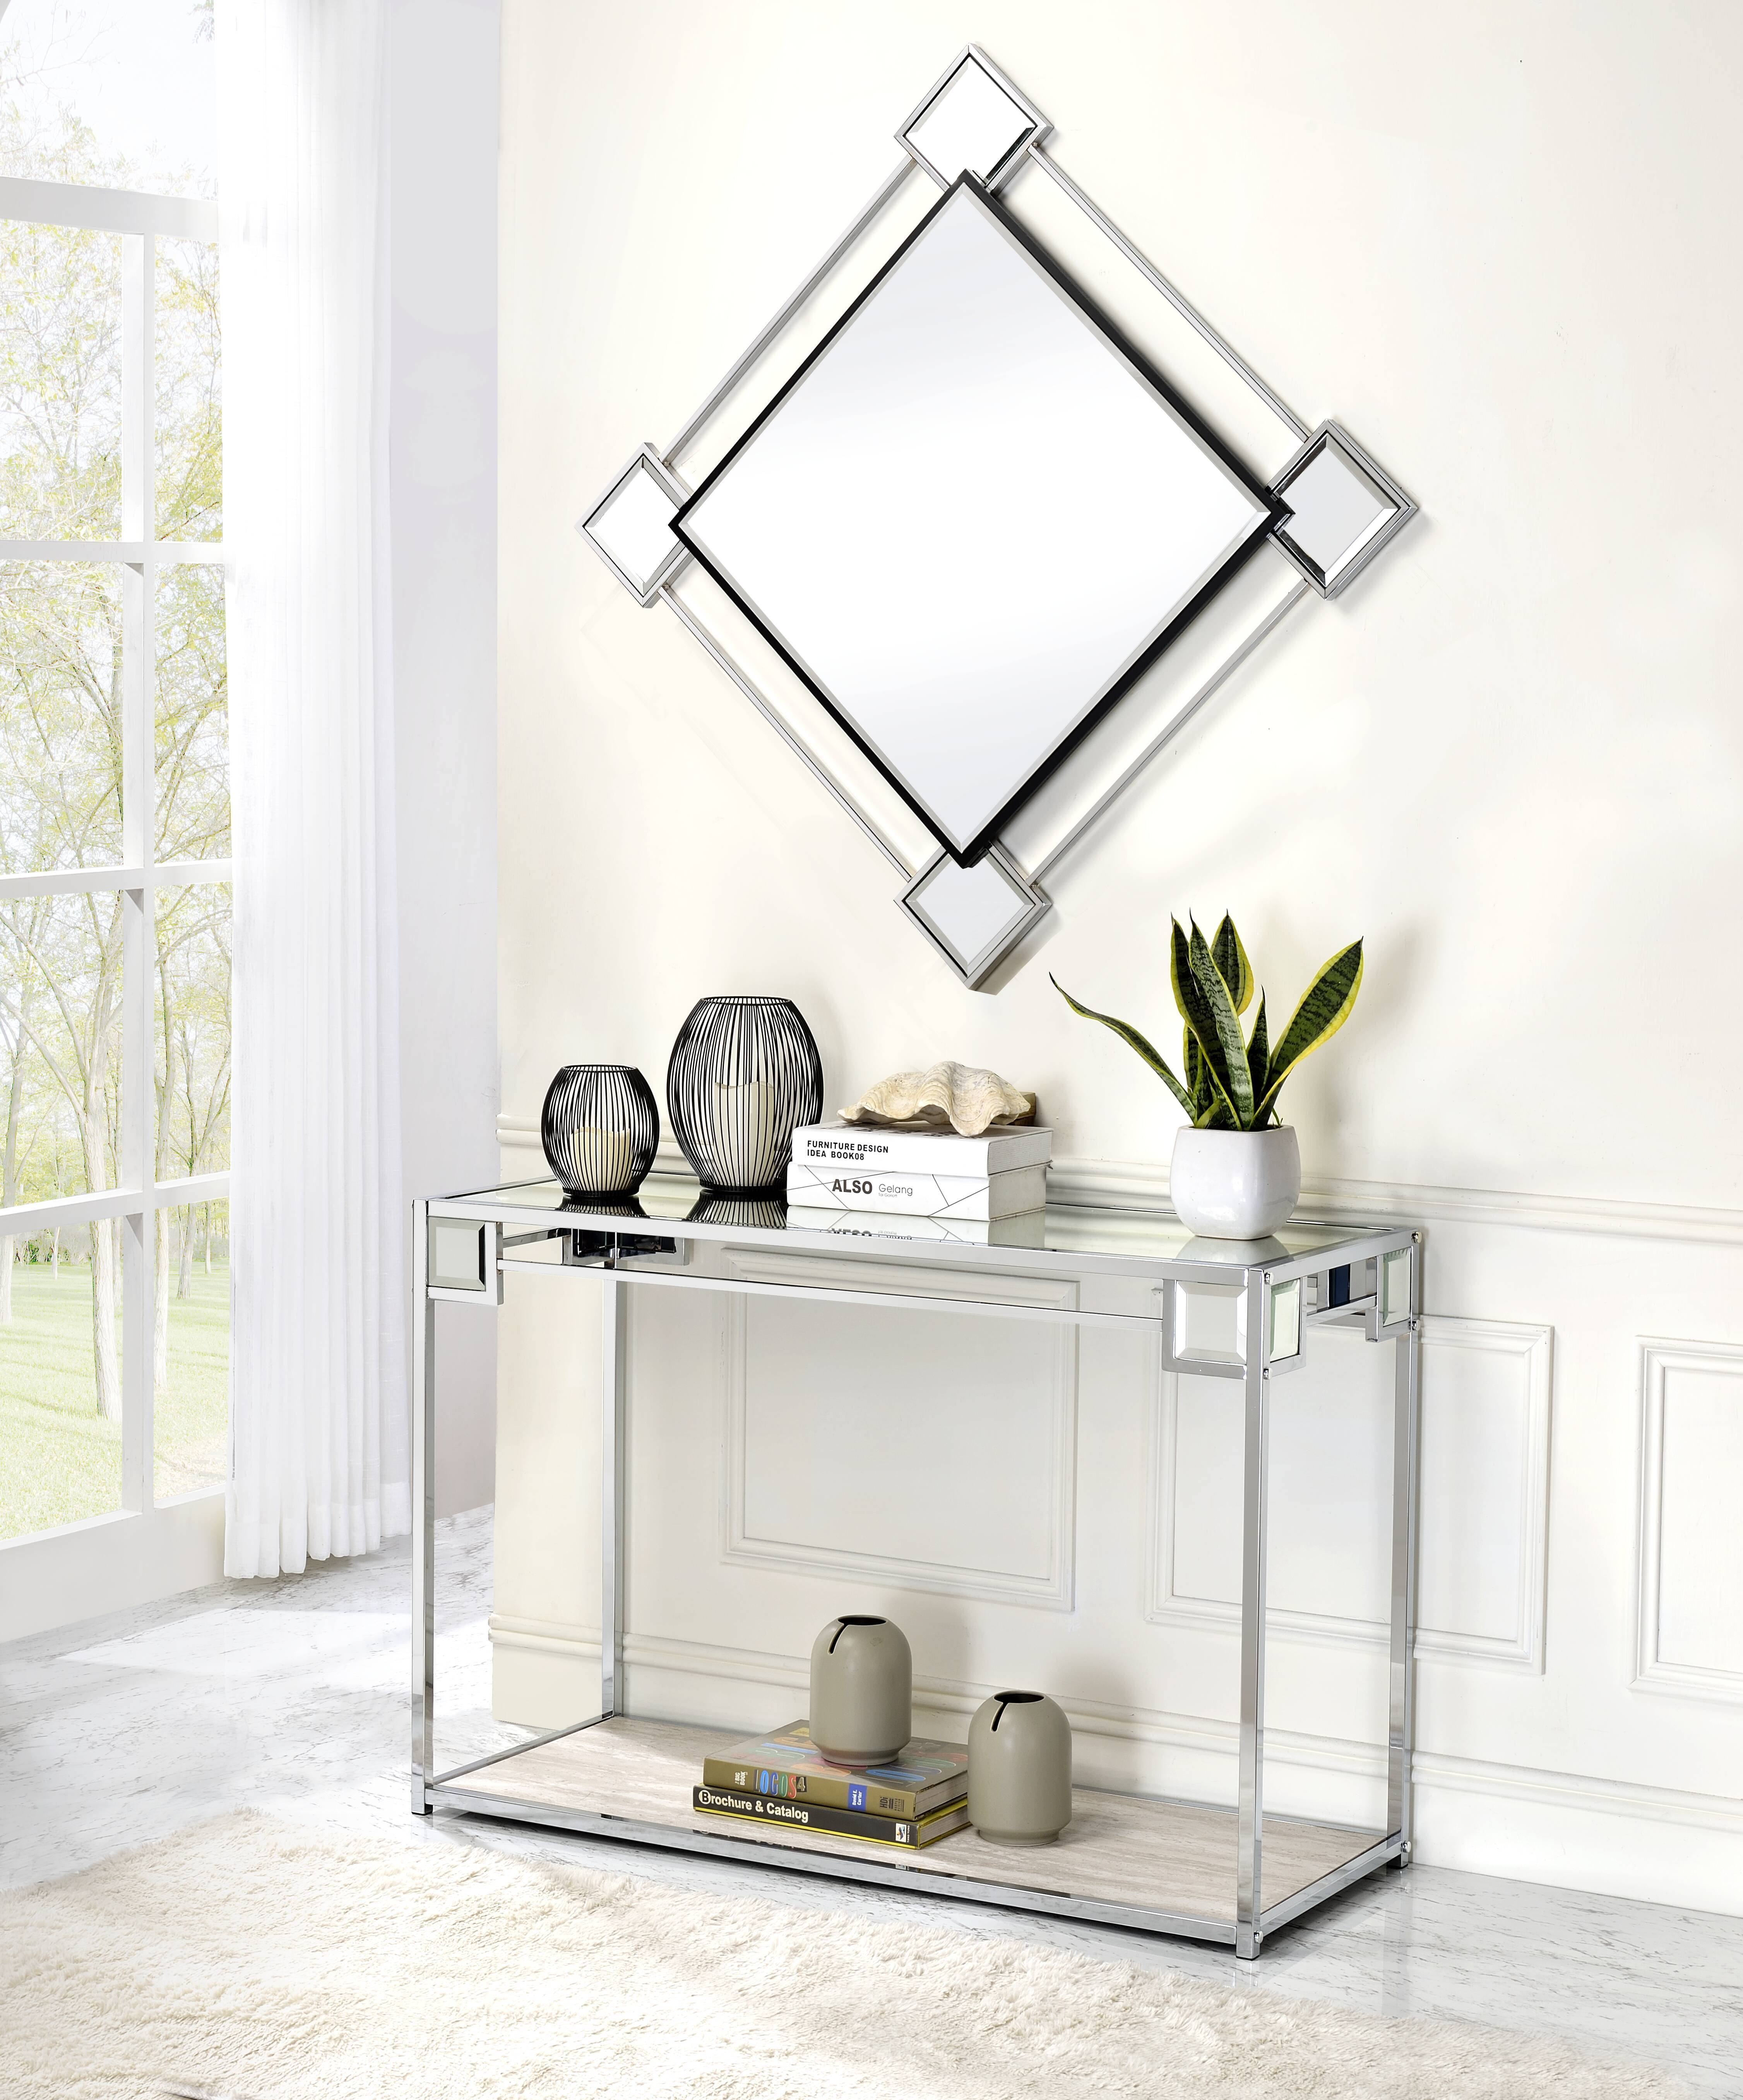 Accent Wall Mirrors: Reflecting Style And Character